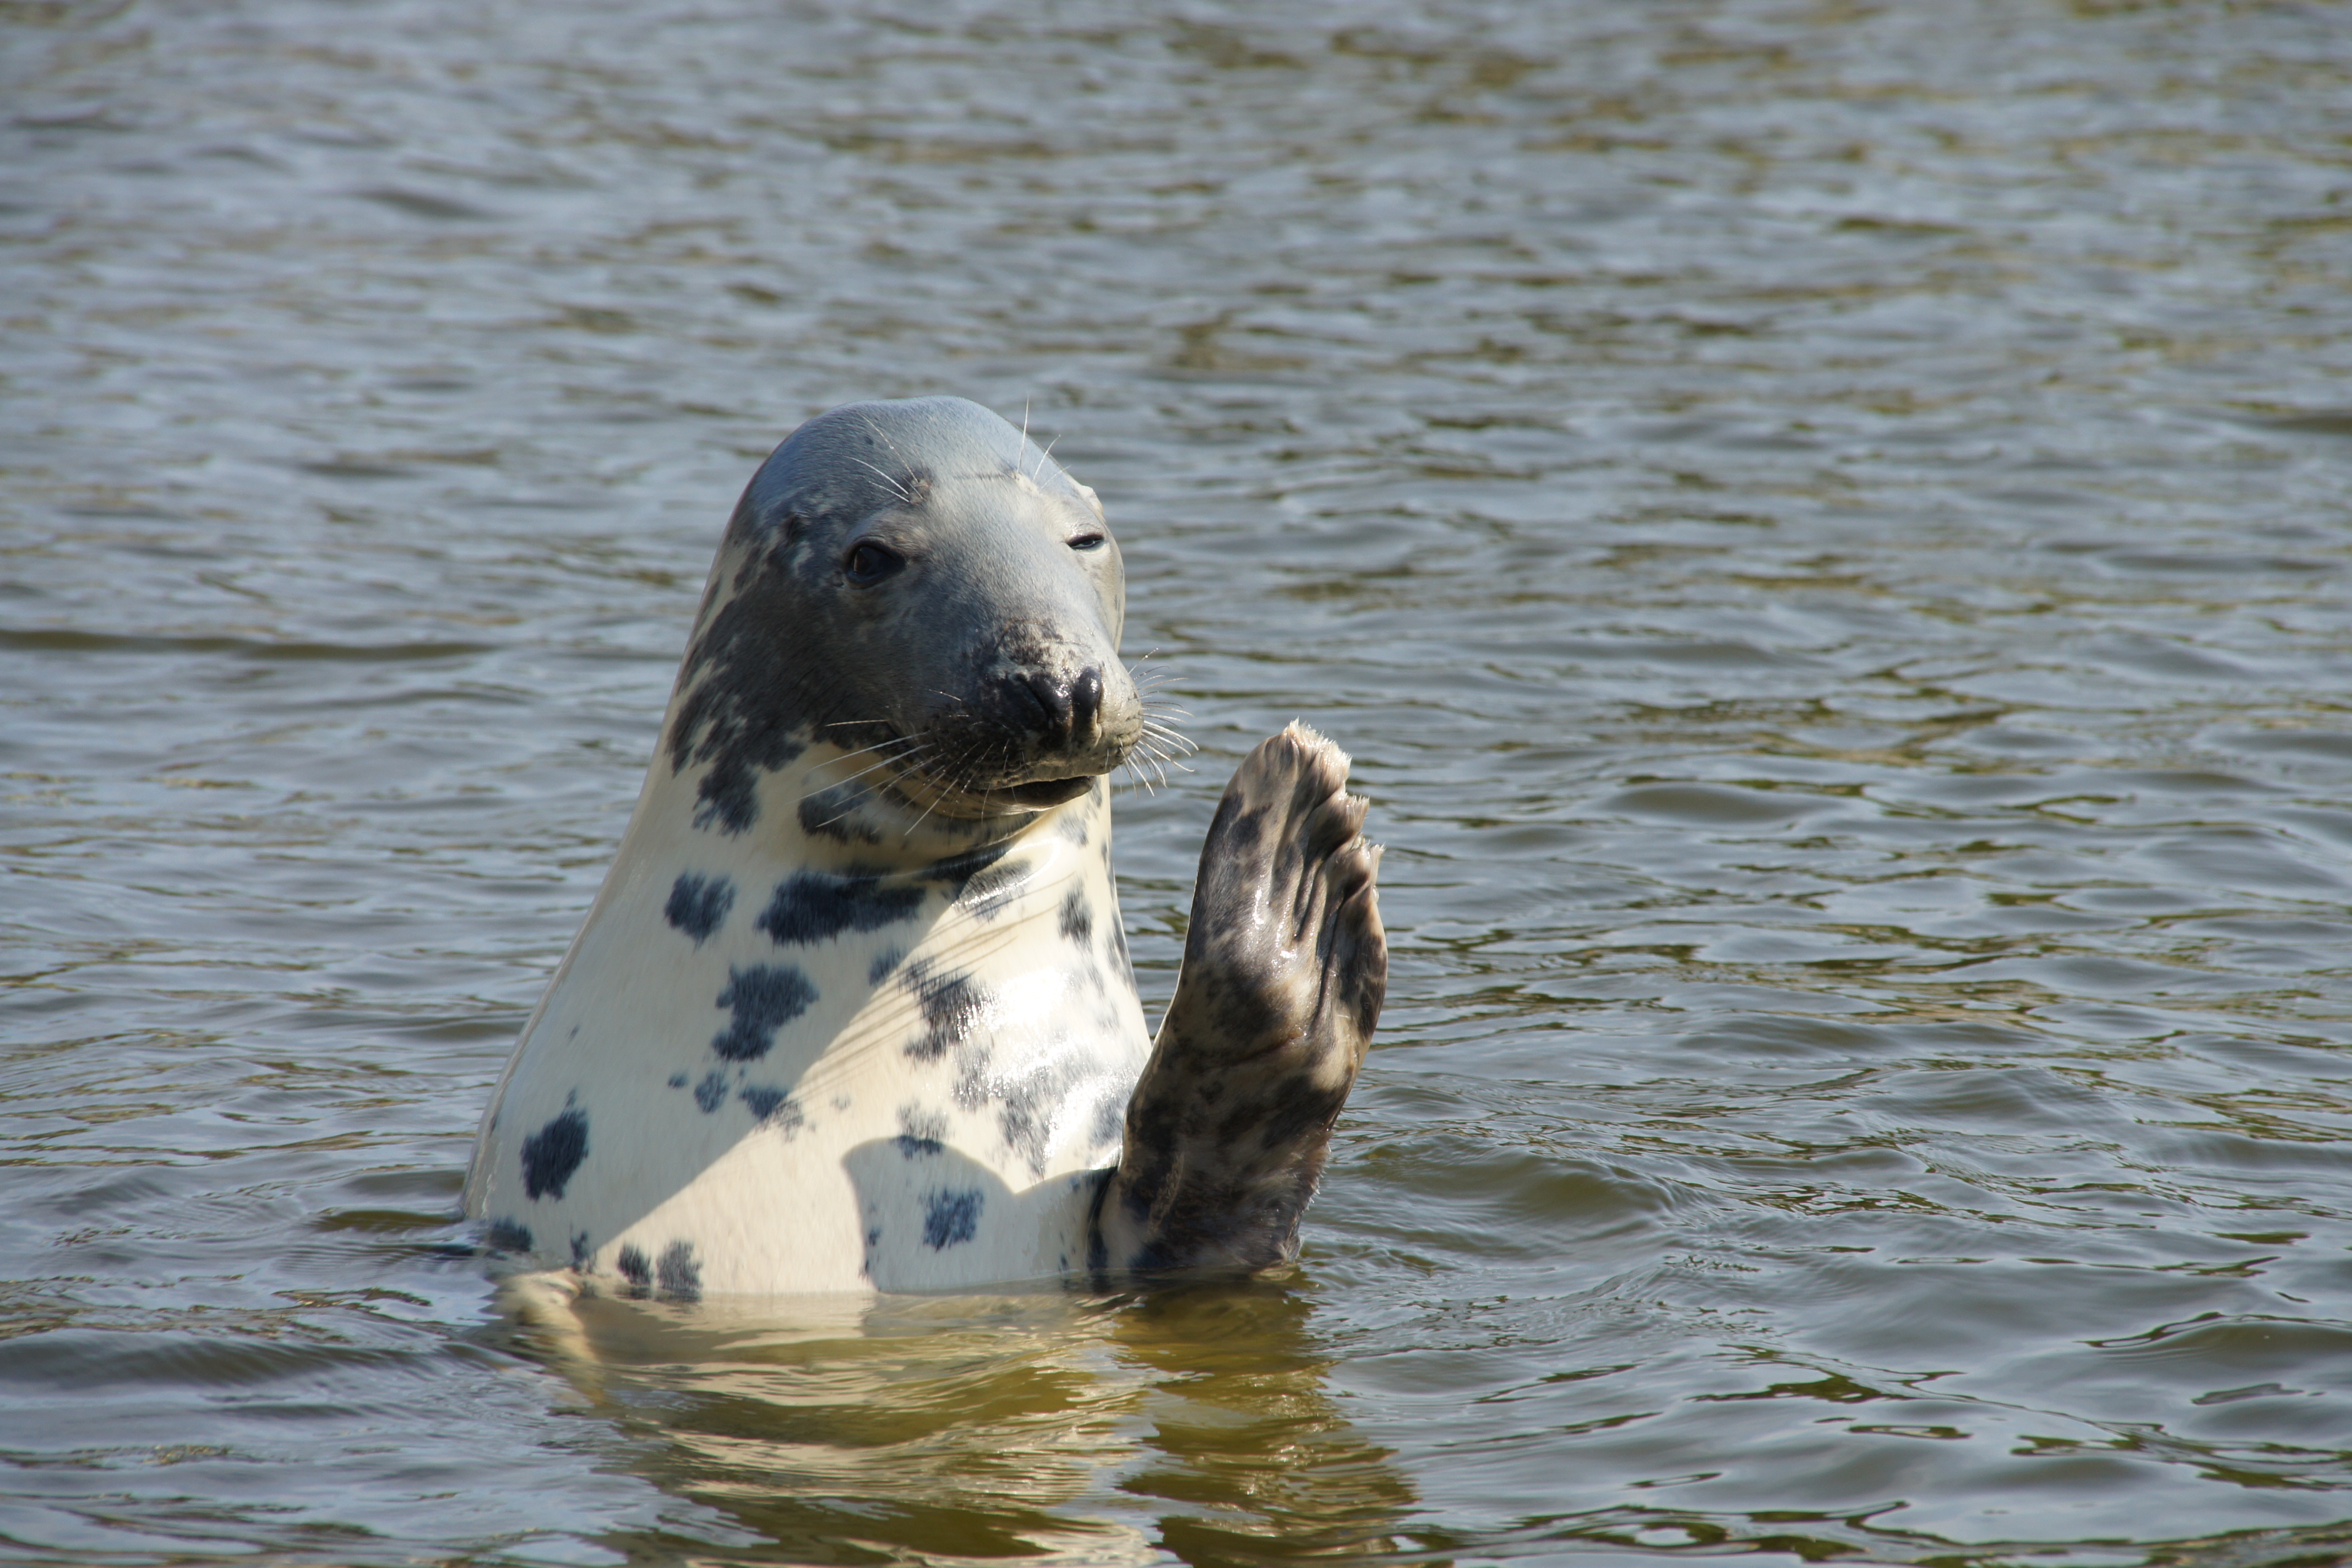 Some things to consider when observing a Seal Colony